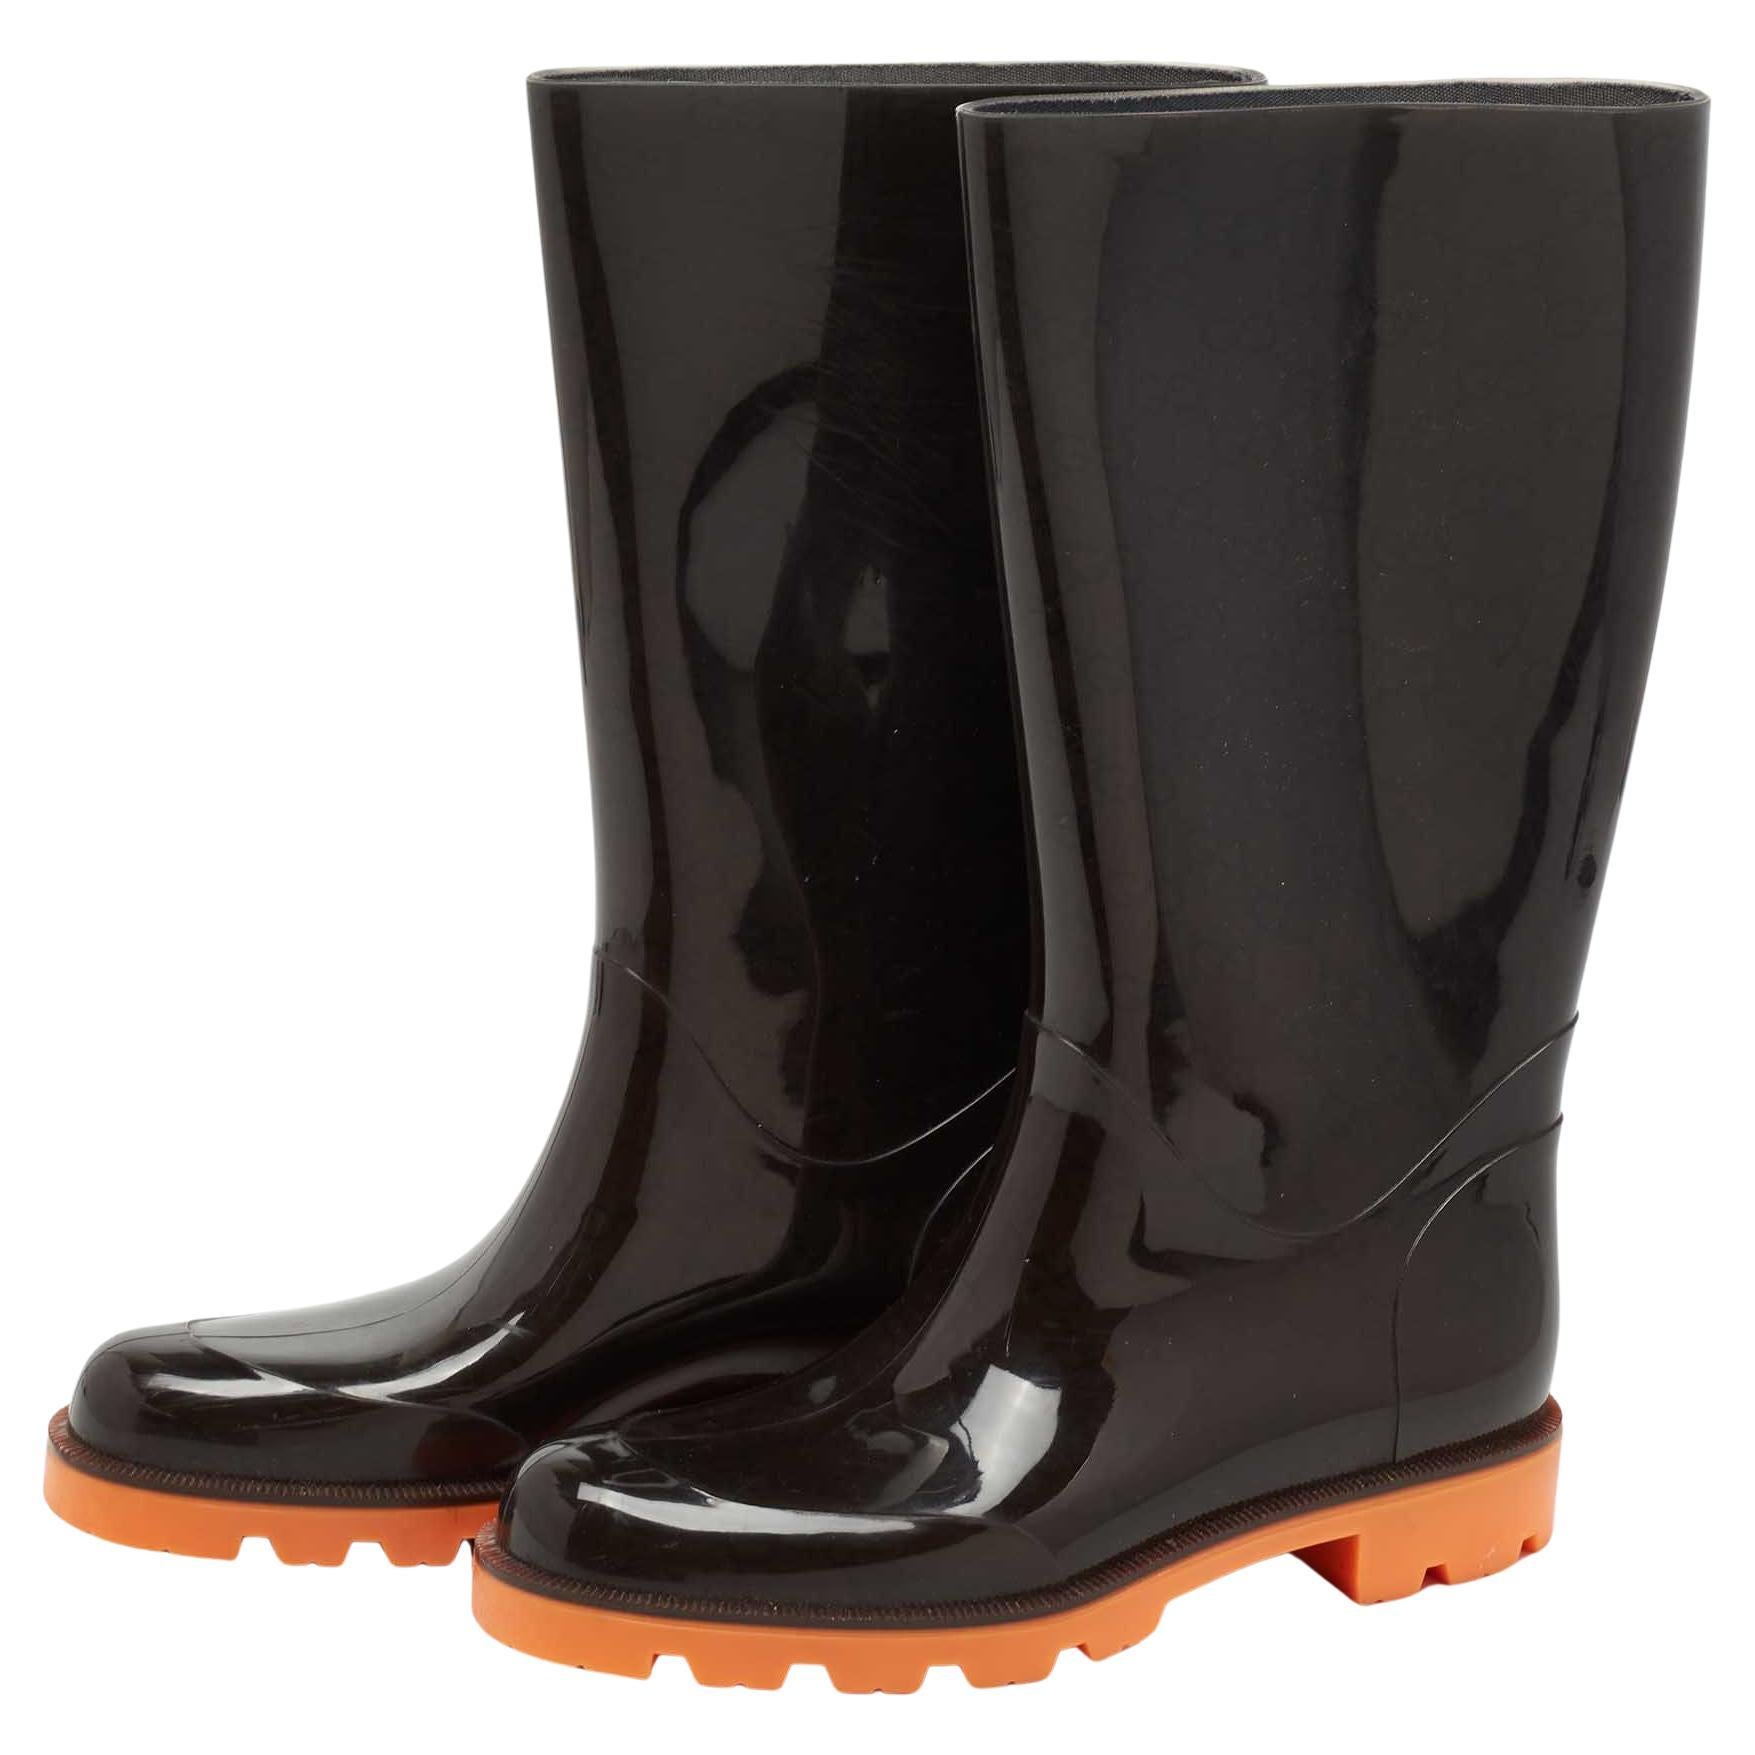 Rubber Rain Boots - 16 For Sale on 1stDibs